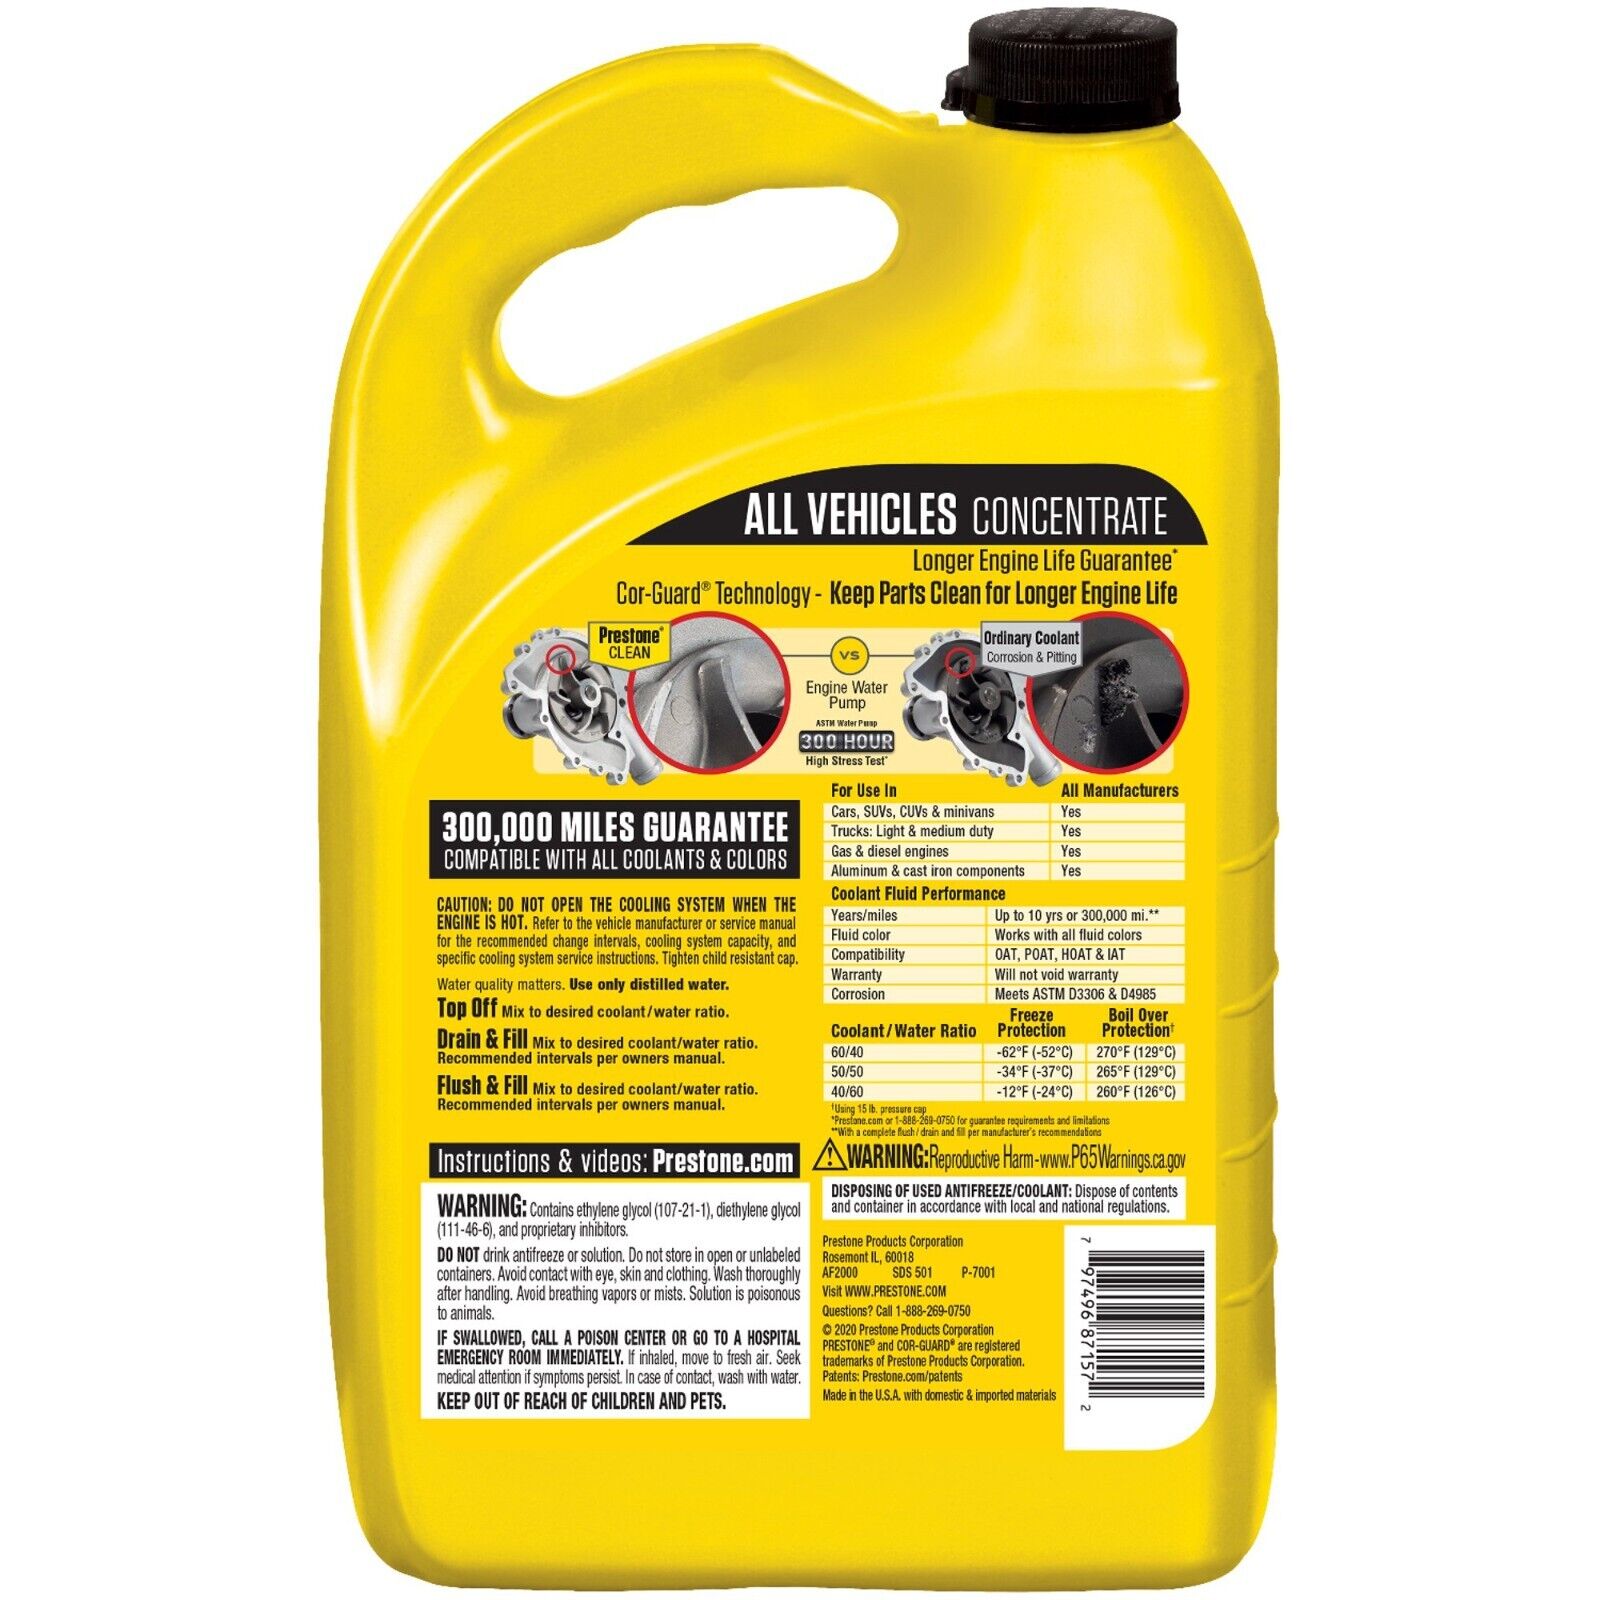 ANT AF2000 Prestone Universal Antifreeze/Coolant Concentrated (Yellow, 1 Gal)